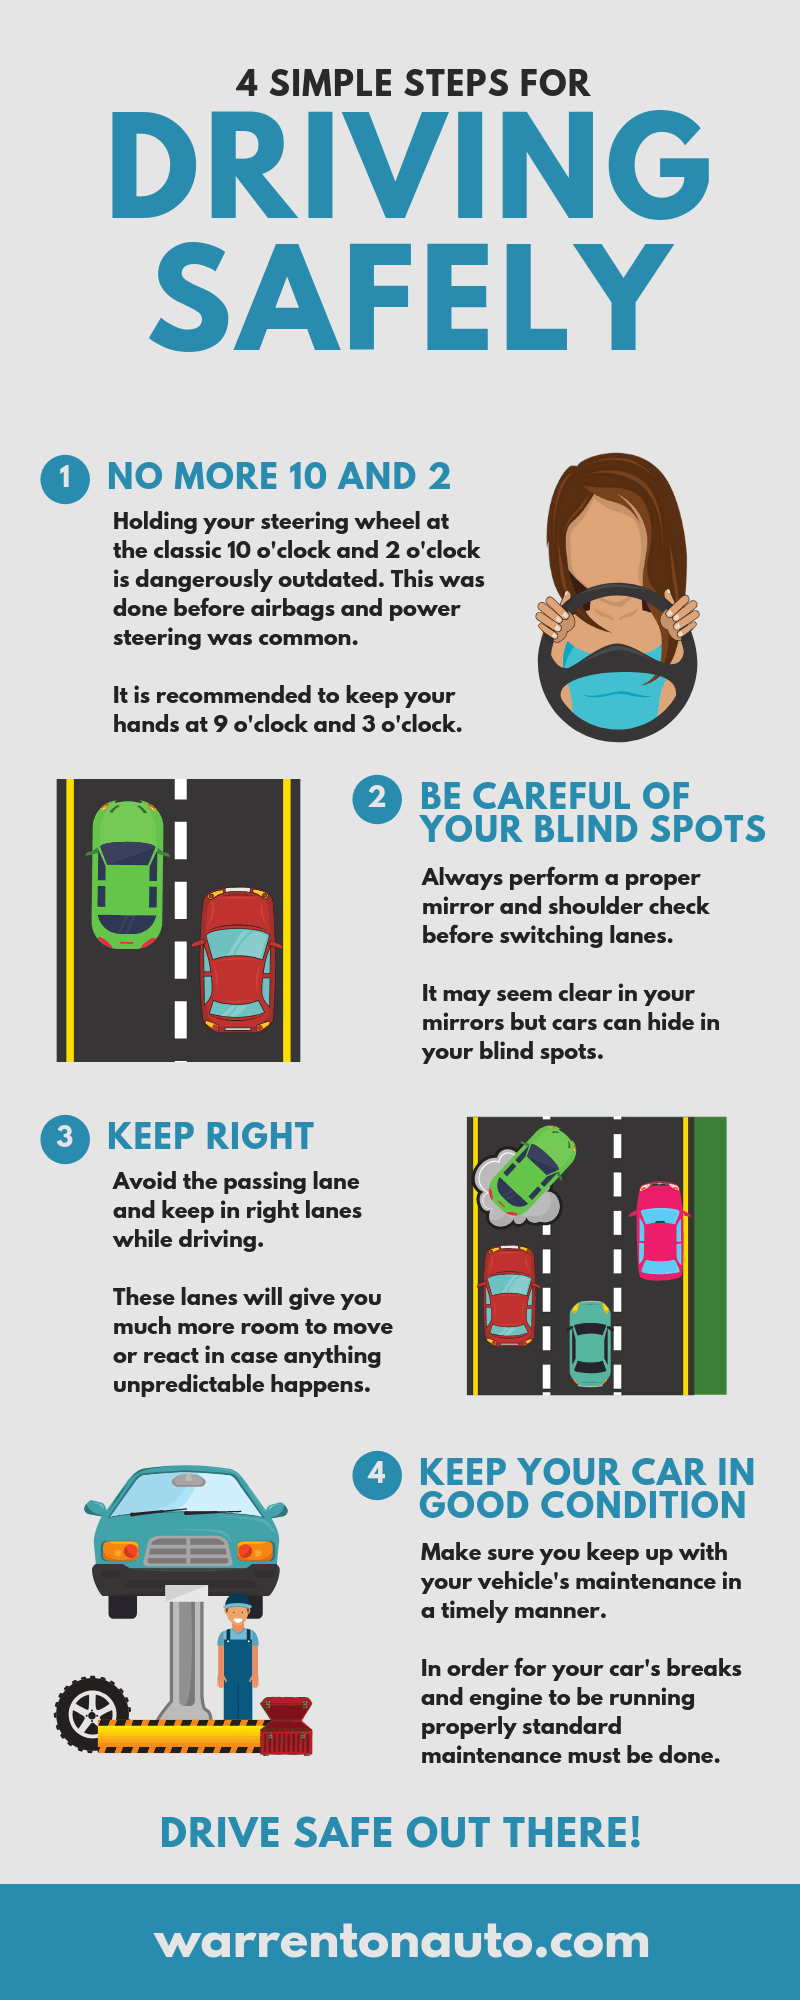 https://warrentonauto.com/wp-content/uploads/2018/10/Information-on-How-to-drive-safely-tips-virginia.png